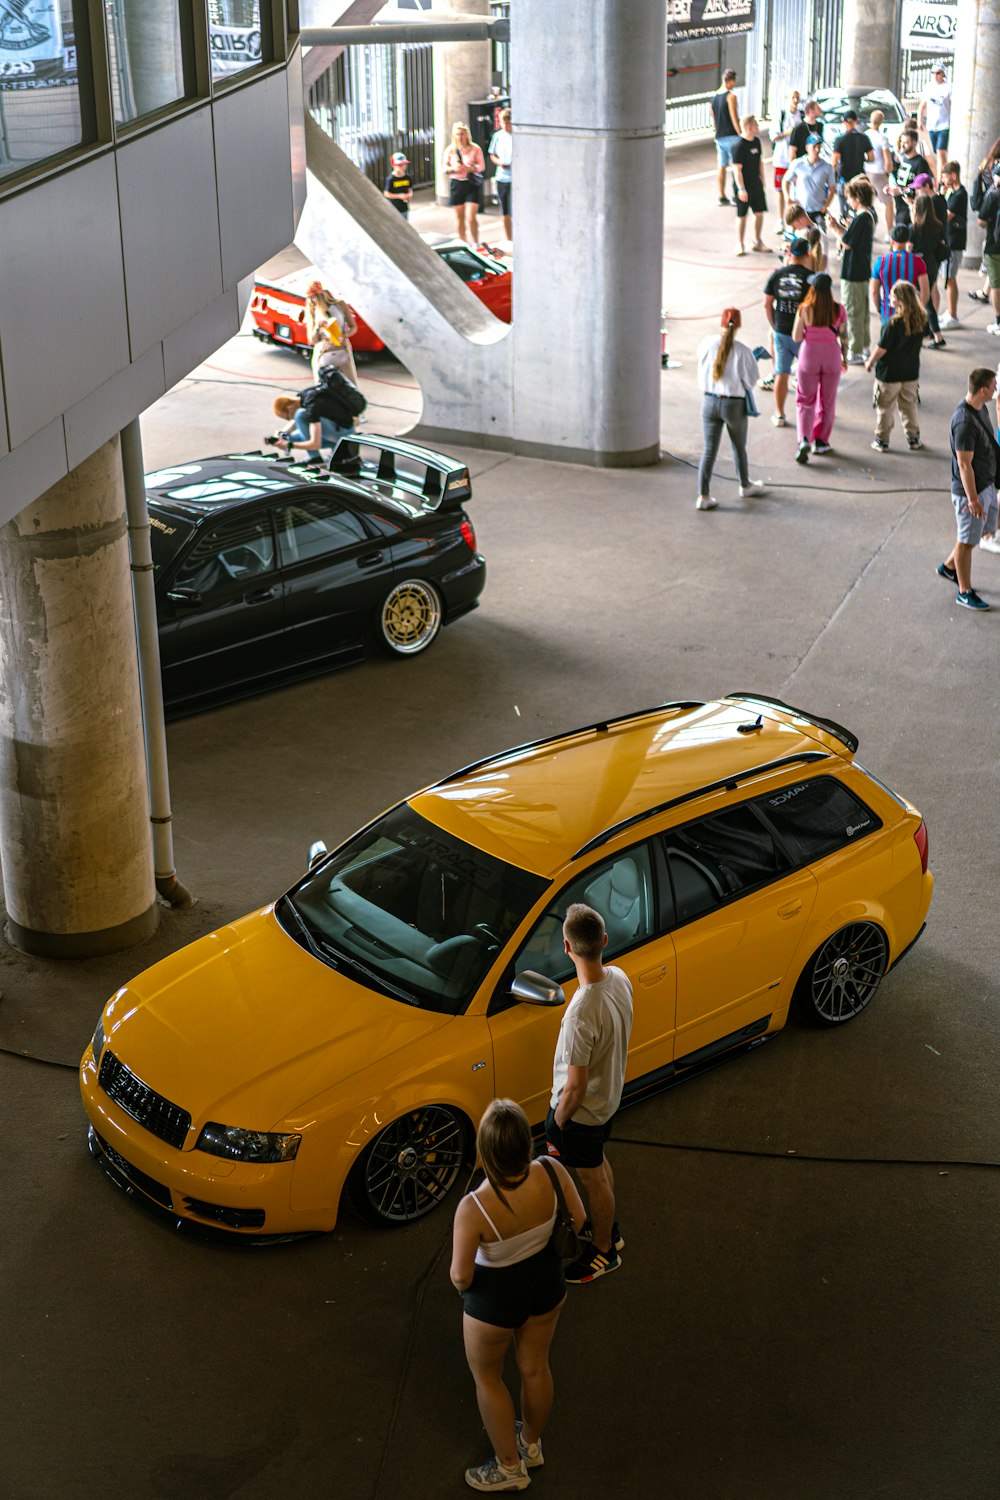 a group of people standing around a yellow car